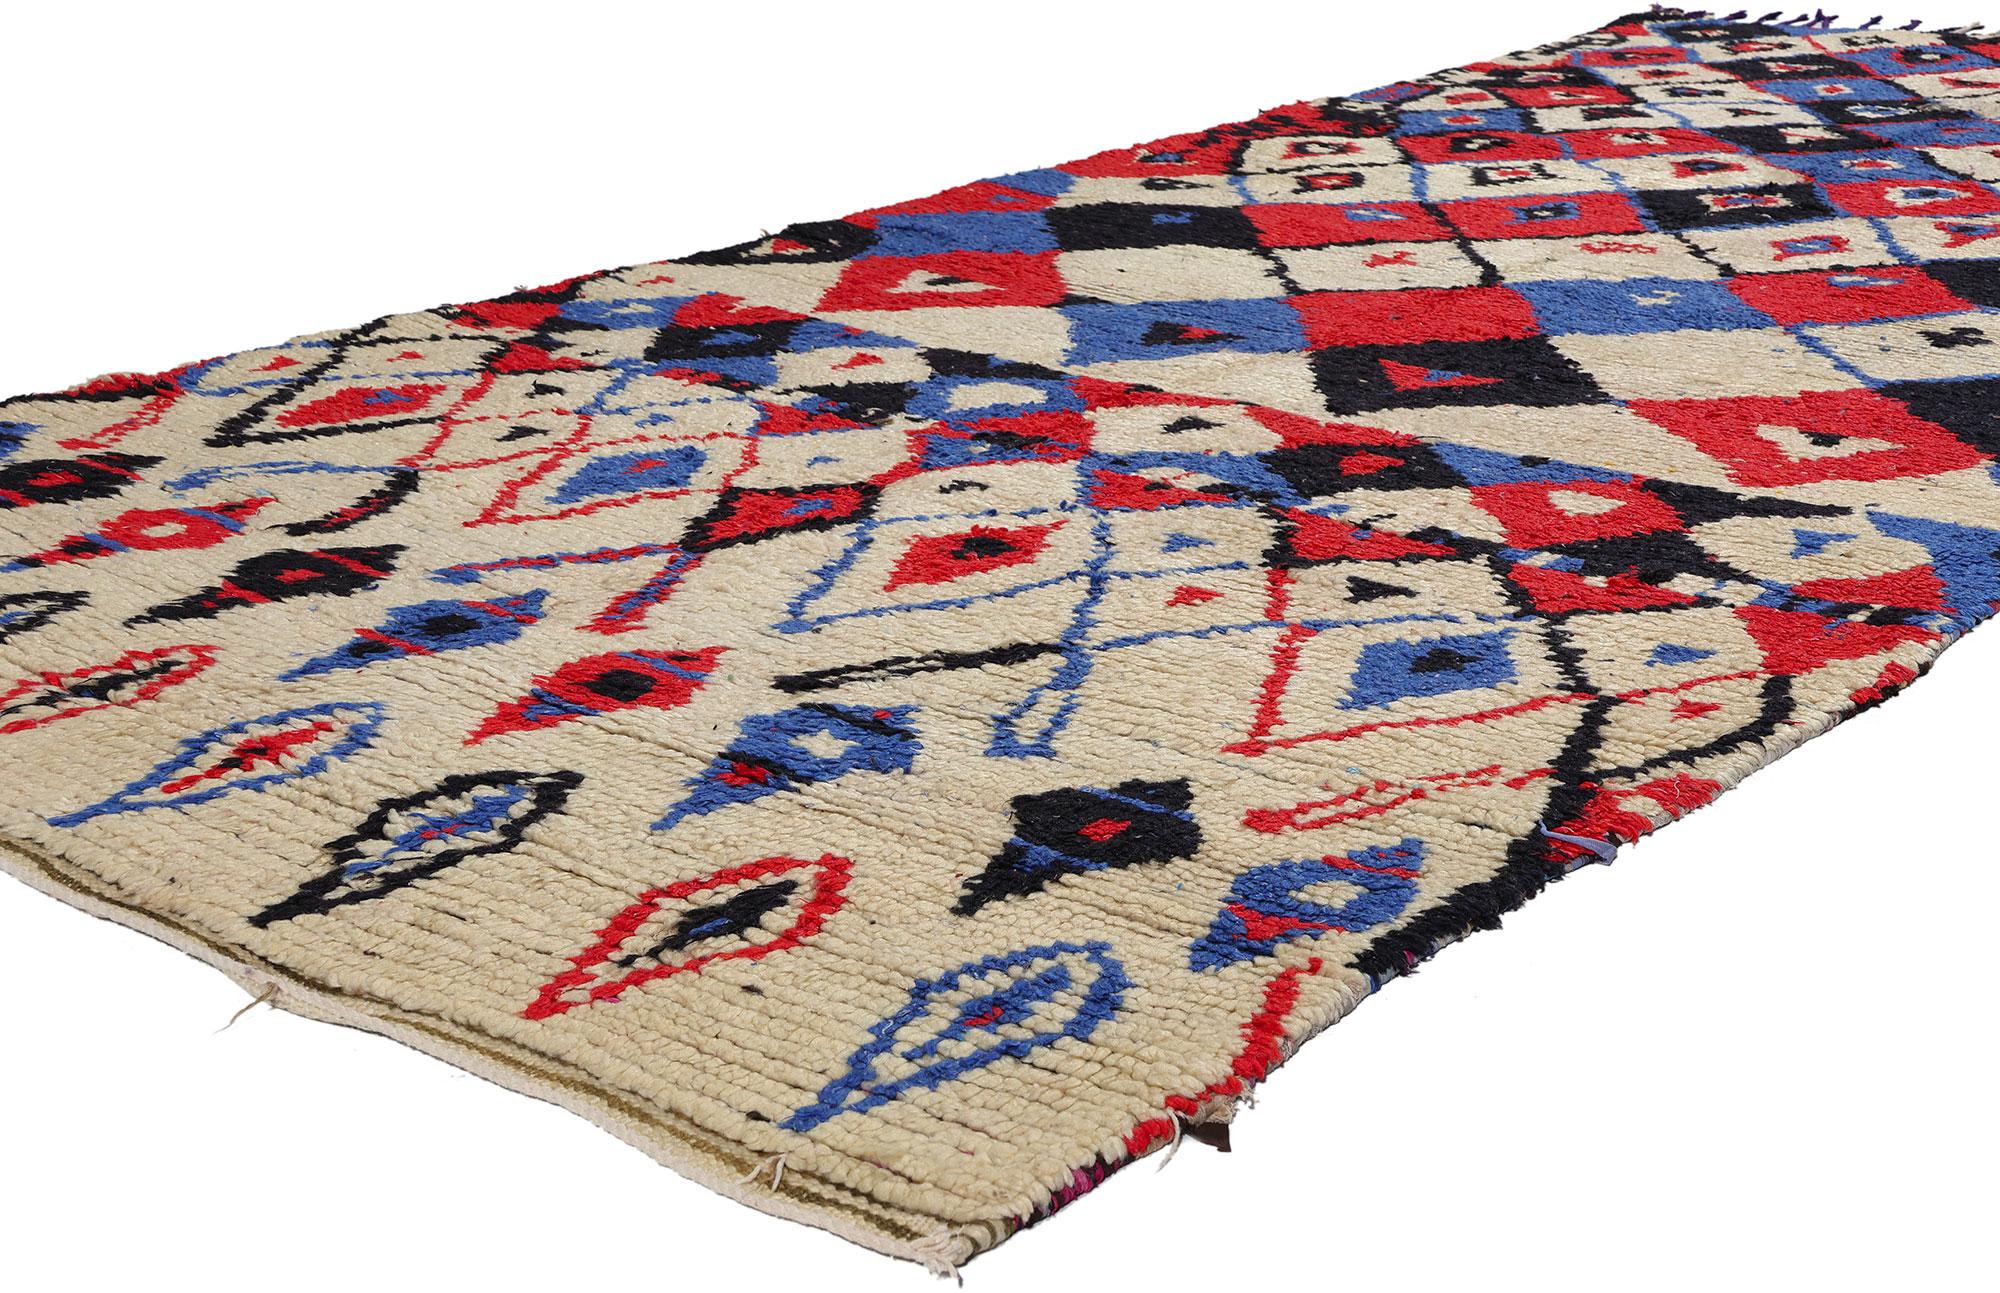 21739 Vintage Boucherouite Moroccan Azilal Rag Rug, 04'04 x 10'03. Azilal rag rugs, affectionately known as Azilal Boucherouite rugs, spin a captivating tale of sustainable craftsmanship echoing from the heart of the Azilal region in the Atlas